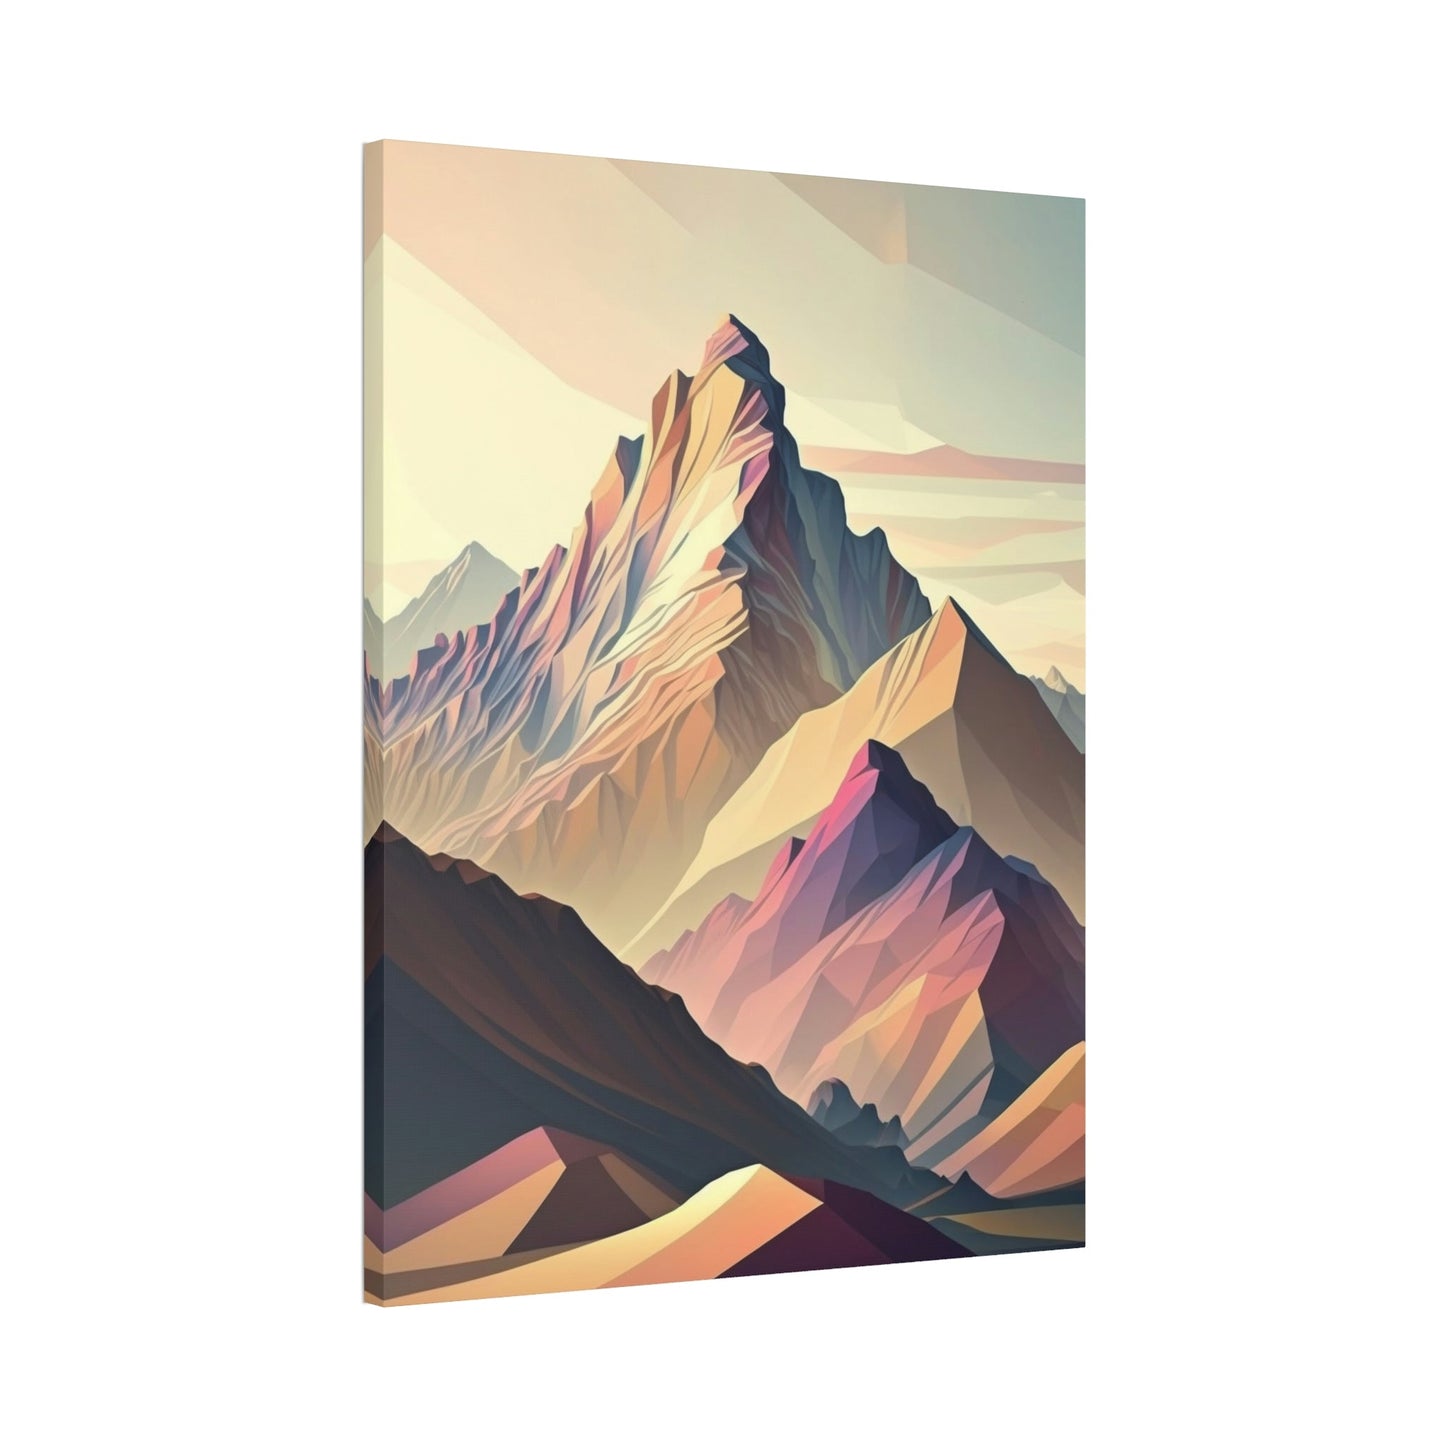 Natures Natural Masterpiece: A Mountain Range on Canvas